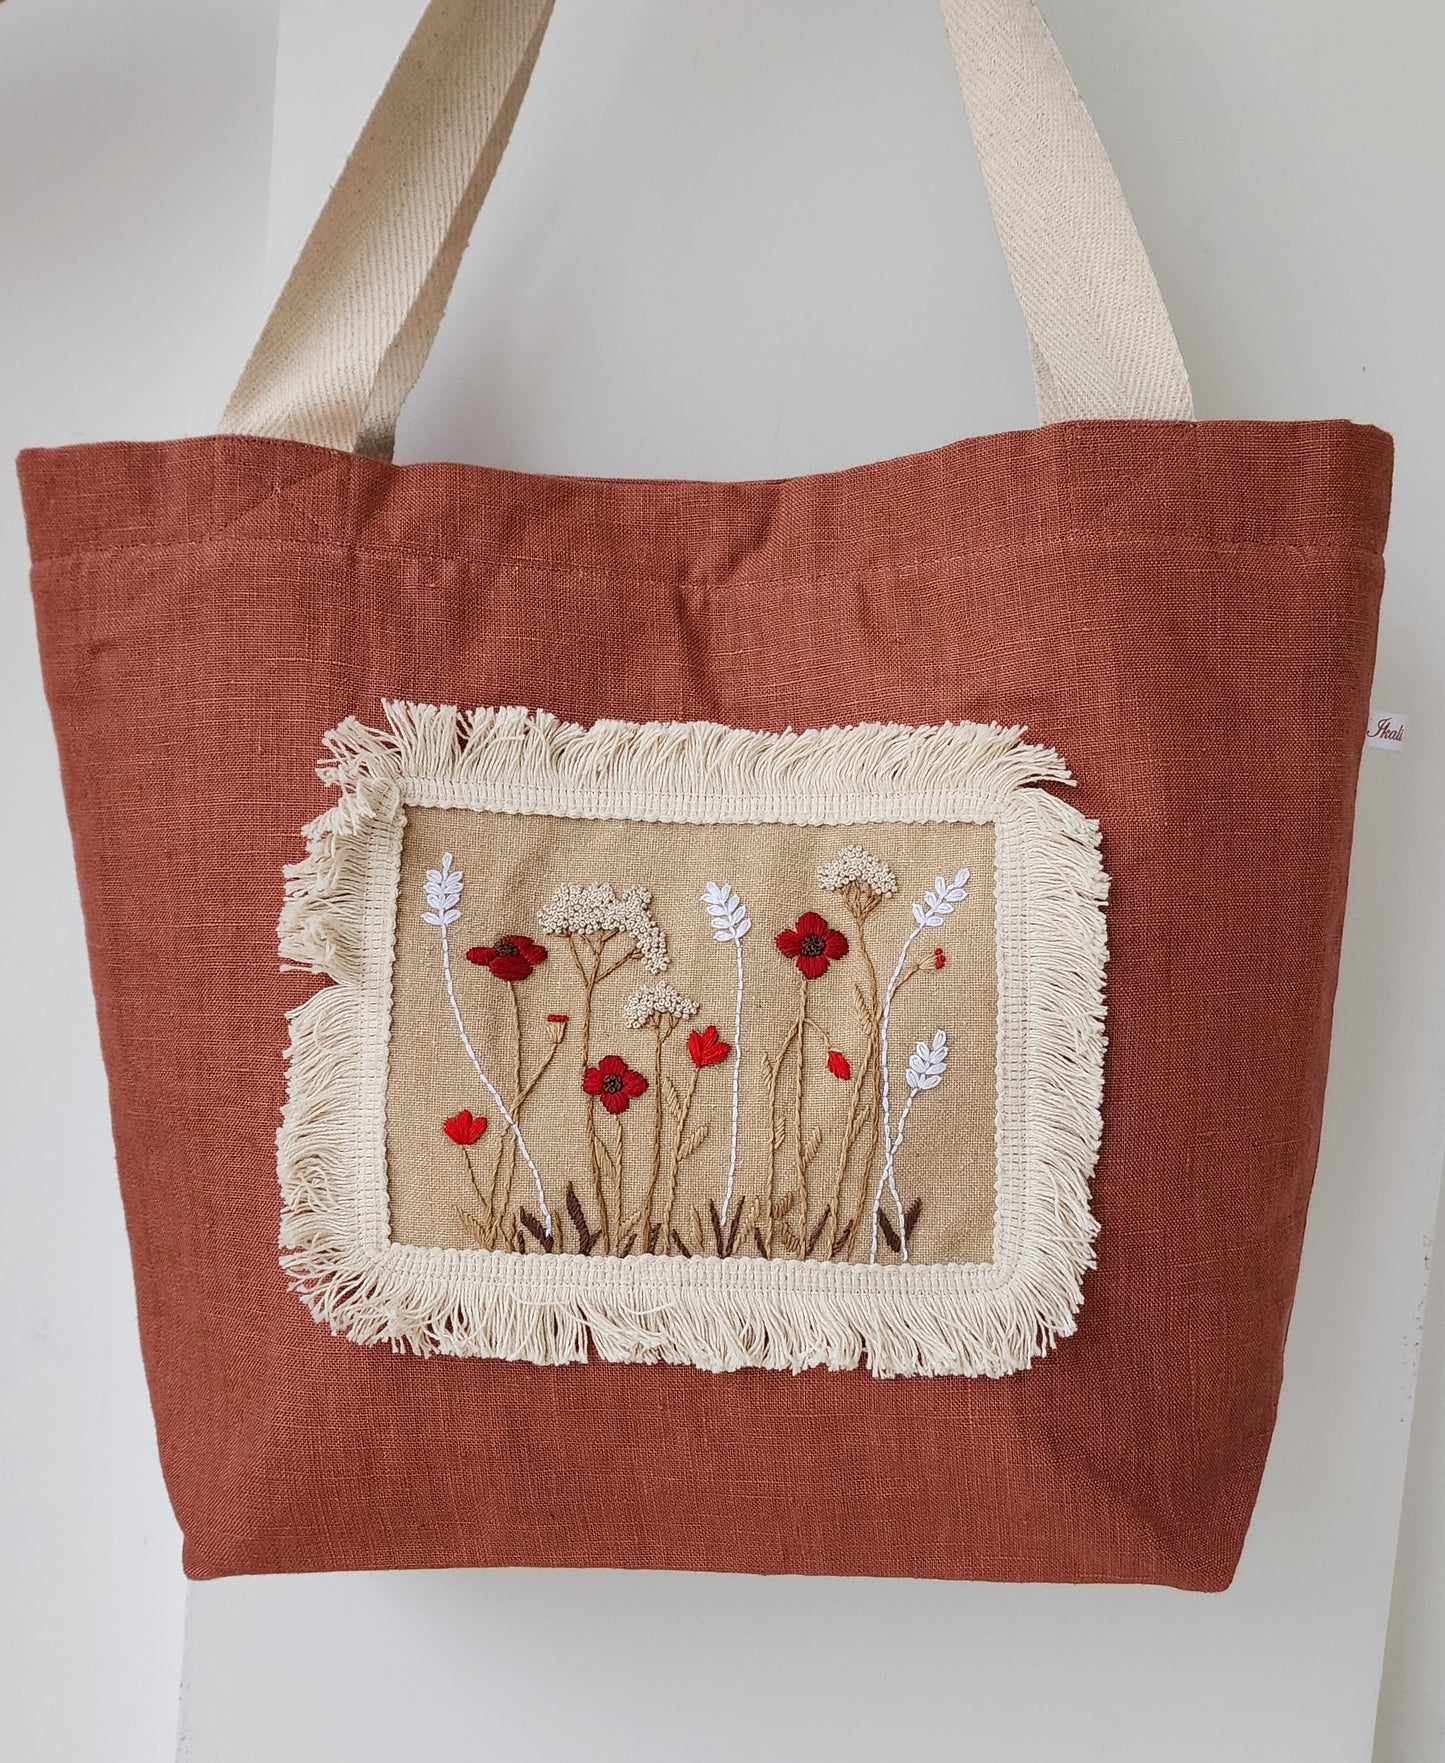 Ikali - Poppy Field -  Hand-embroidered Tote